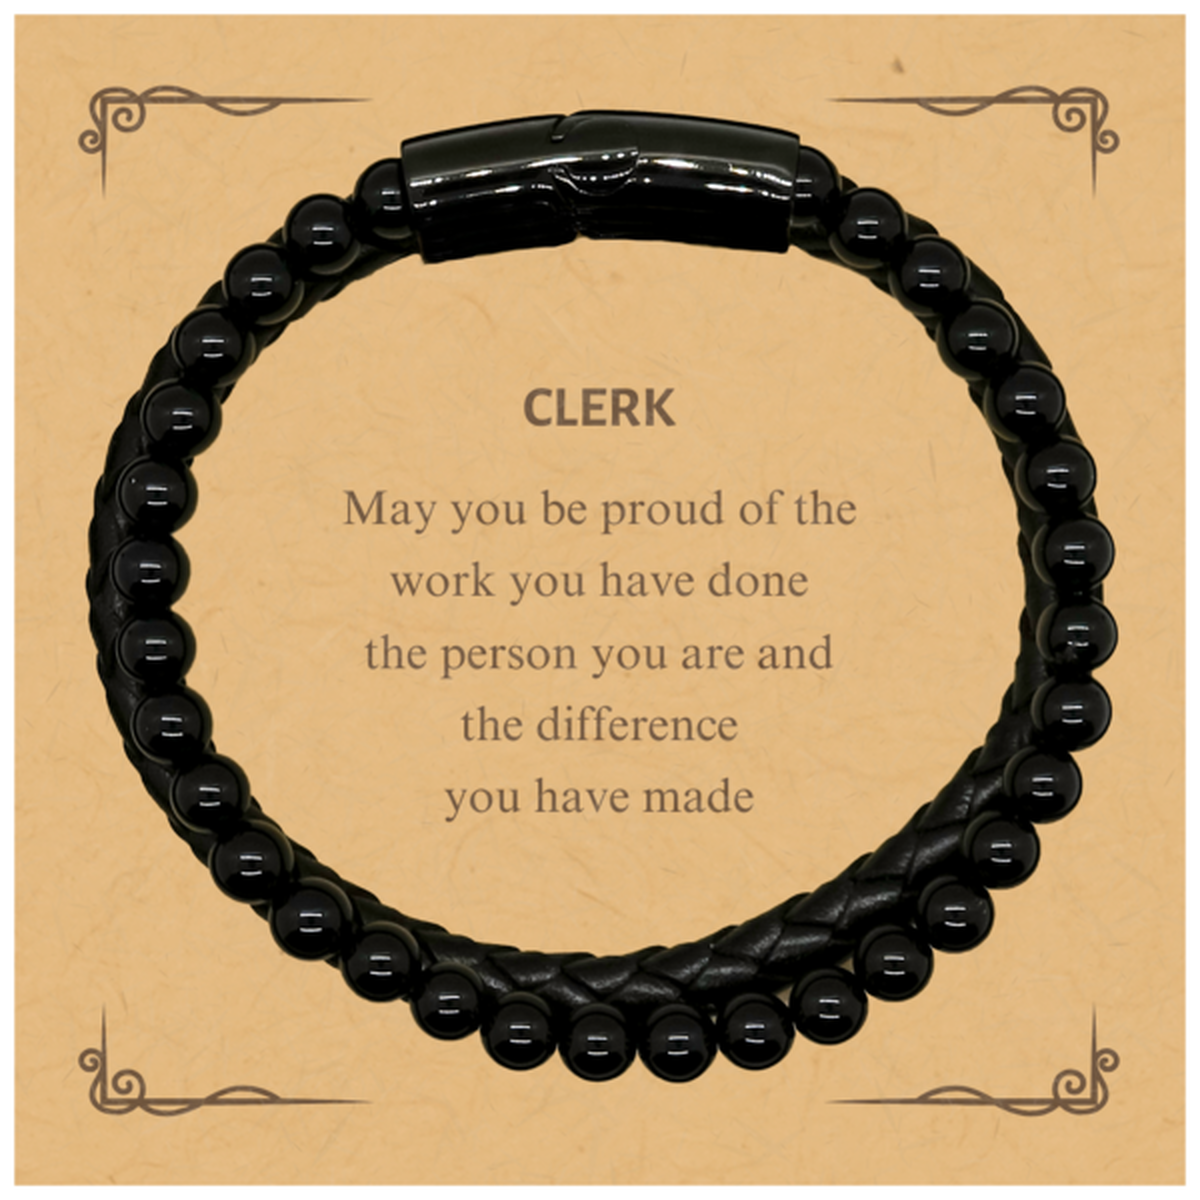 Clerk May you be proud of the work you have done, Retirement Clerk Stone Leather Bracelets for Colleague Appreciation Gifts Amazing for Clerk